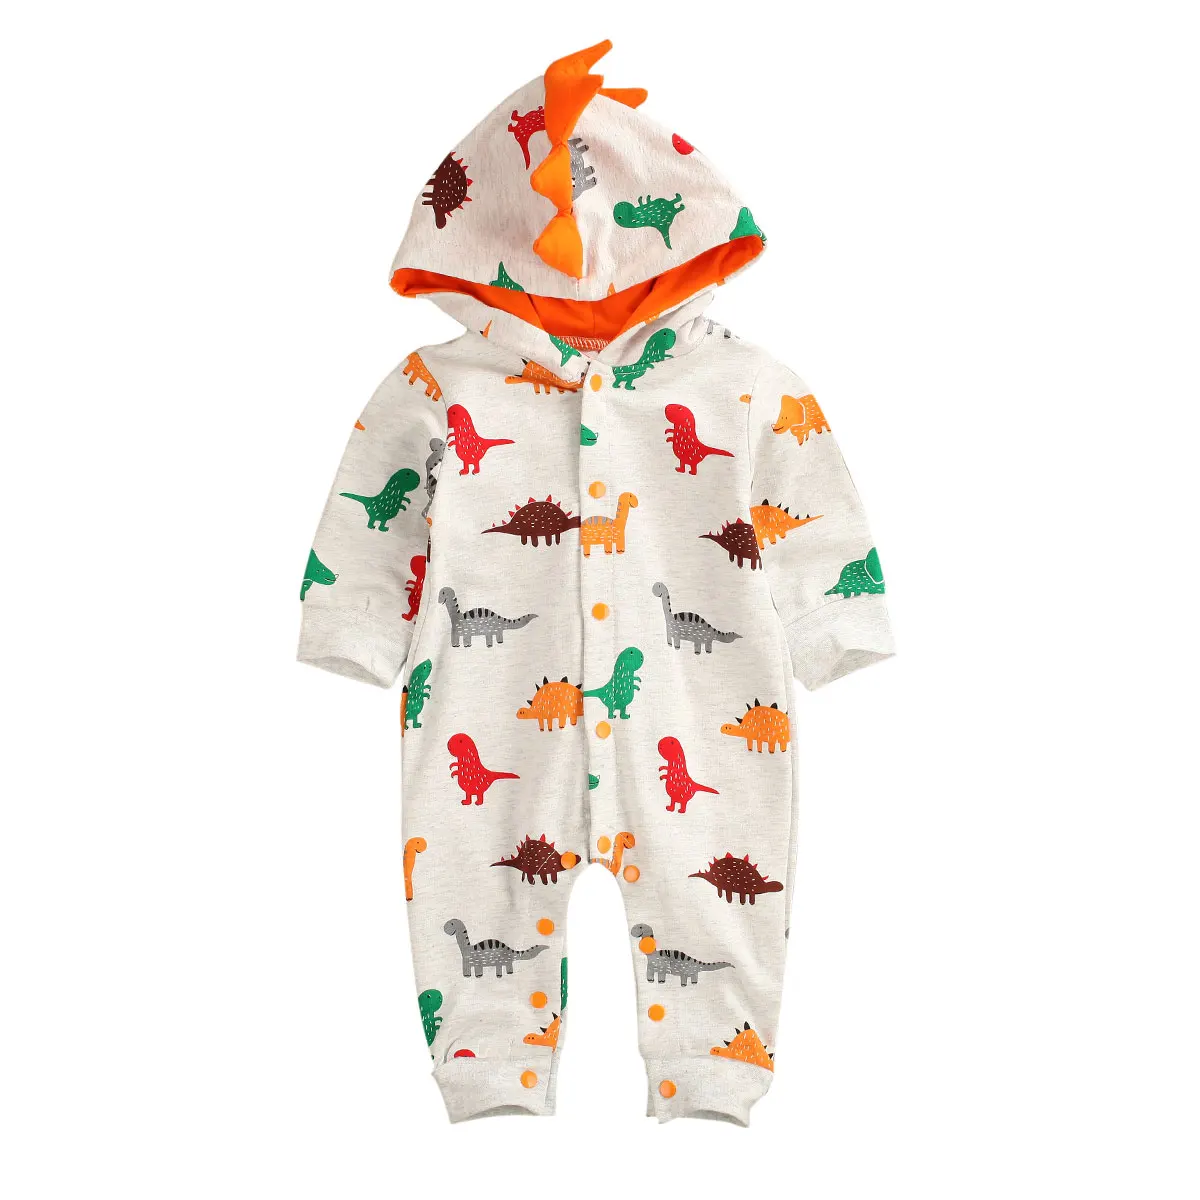 Bamboo fiber children's clothes 0-24M Newborn Baby Boy Girl Dinosaur Romper Long Sleeve Hooded Cartoon Jumpsuit Autumn Spring Soft Baby Clothes Baby Bodysuits made from viscose 